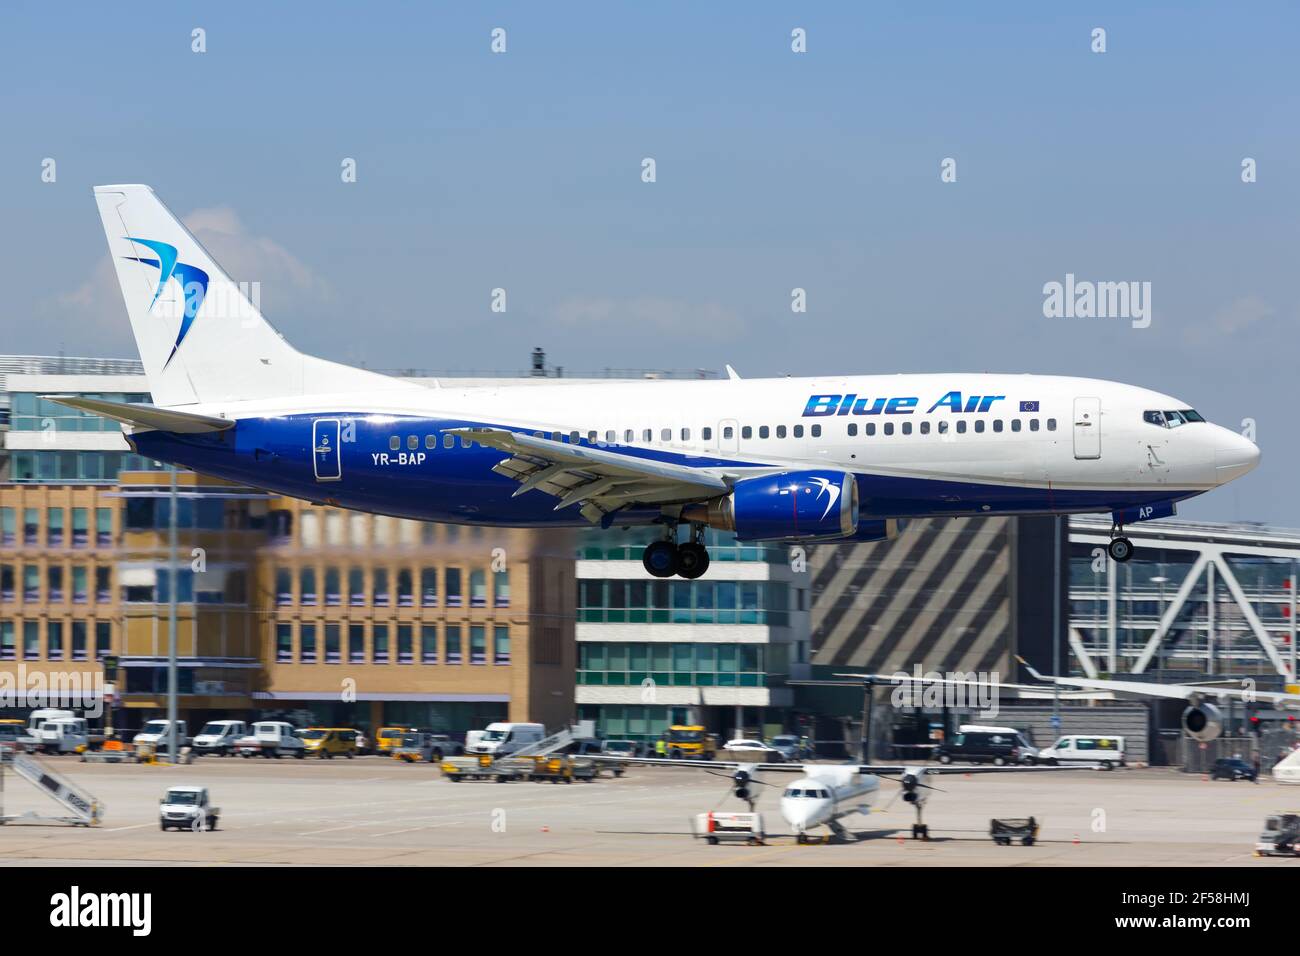 Stuttgart, Germany - May 21, 2018: Blue Air Boeing 737 airplane at Stuttgart airport in Germany. Boeing is an American aircraft manufacturer headquart Stock Photo